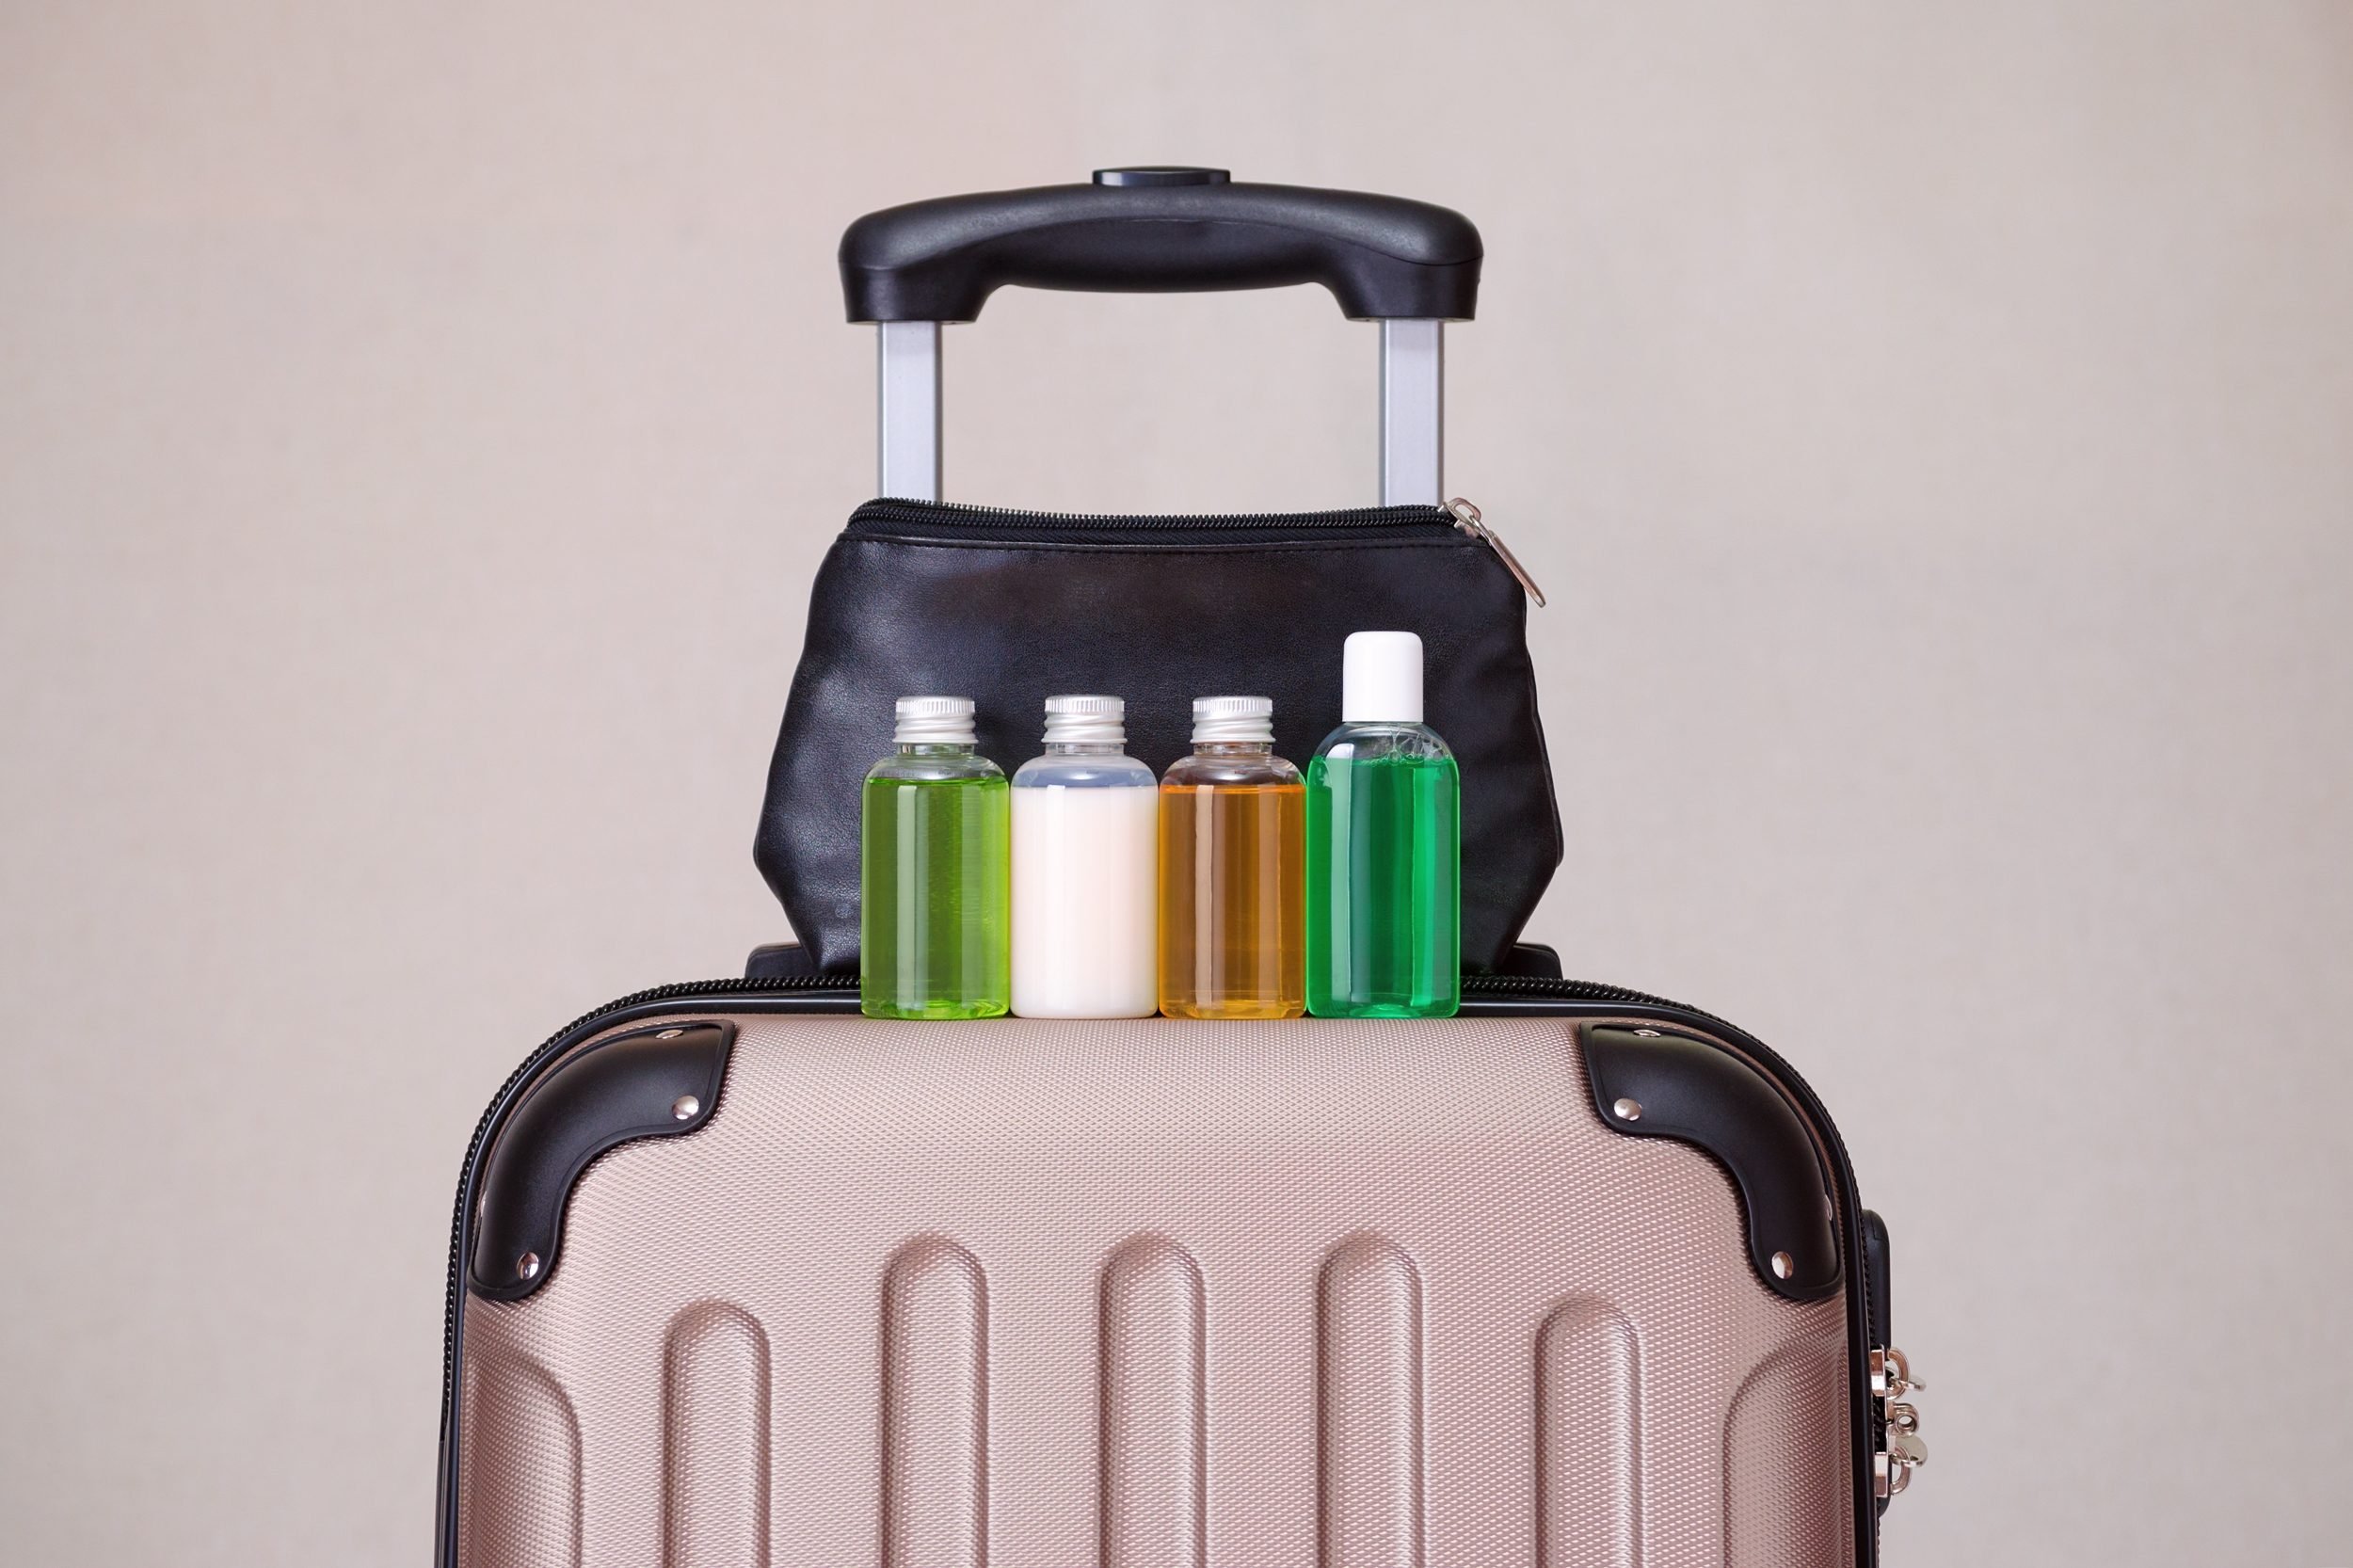 TSA Liquid Limit: 15 Items over 3.4 Ounces That Can Go in Your Carry-On